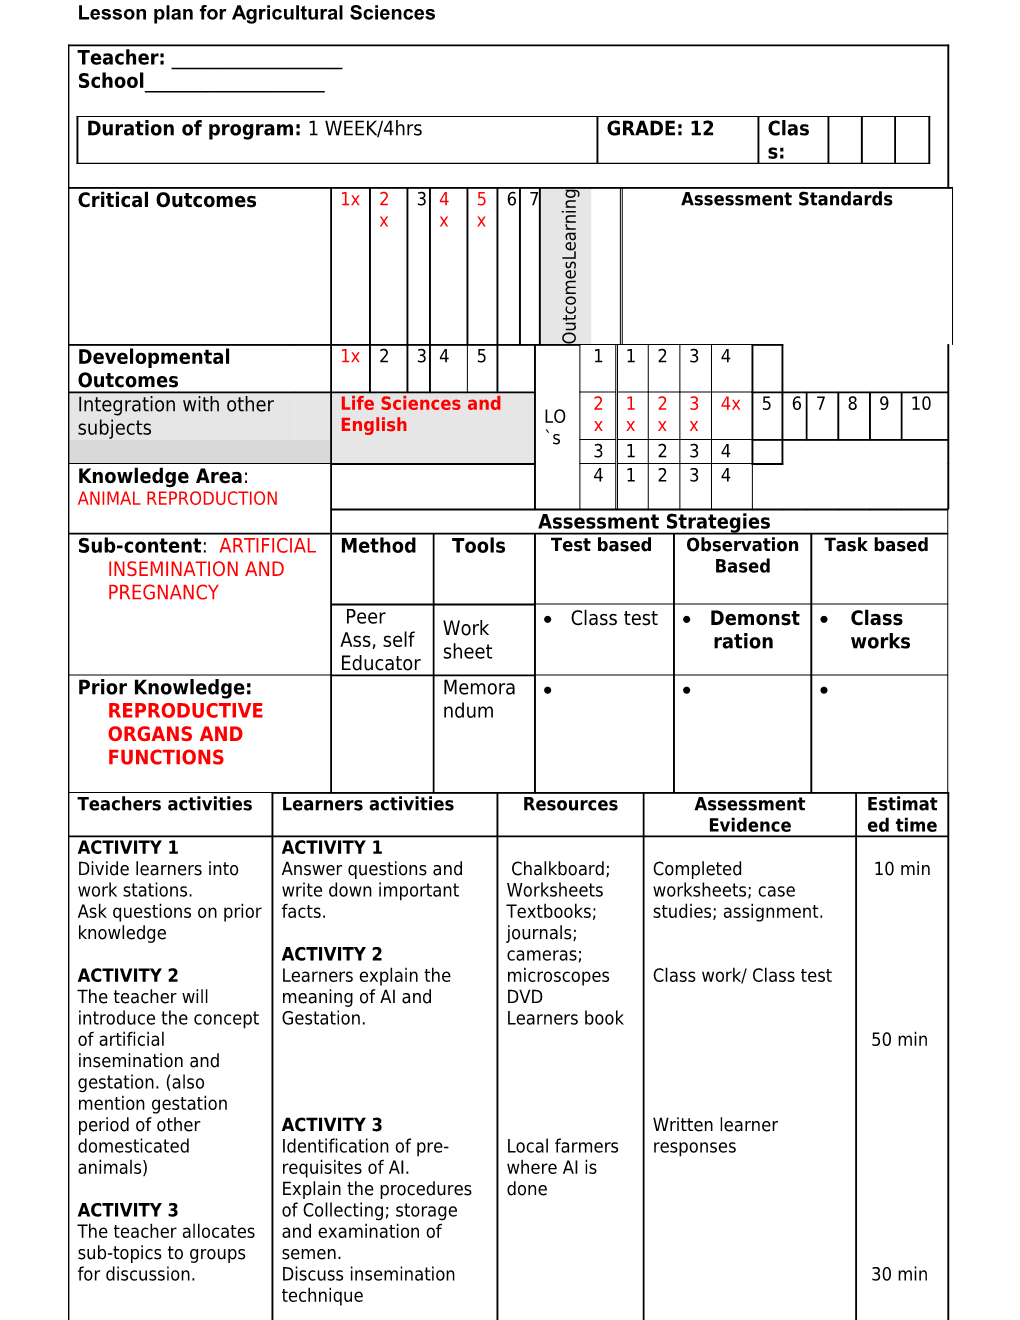 Lesson Plan Format for Agricultural Sciences s1